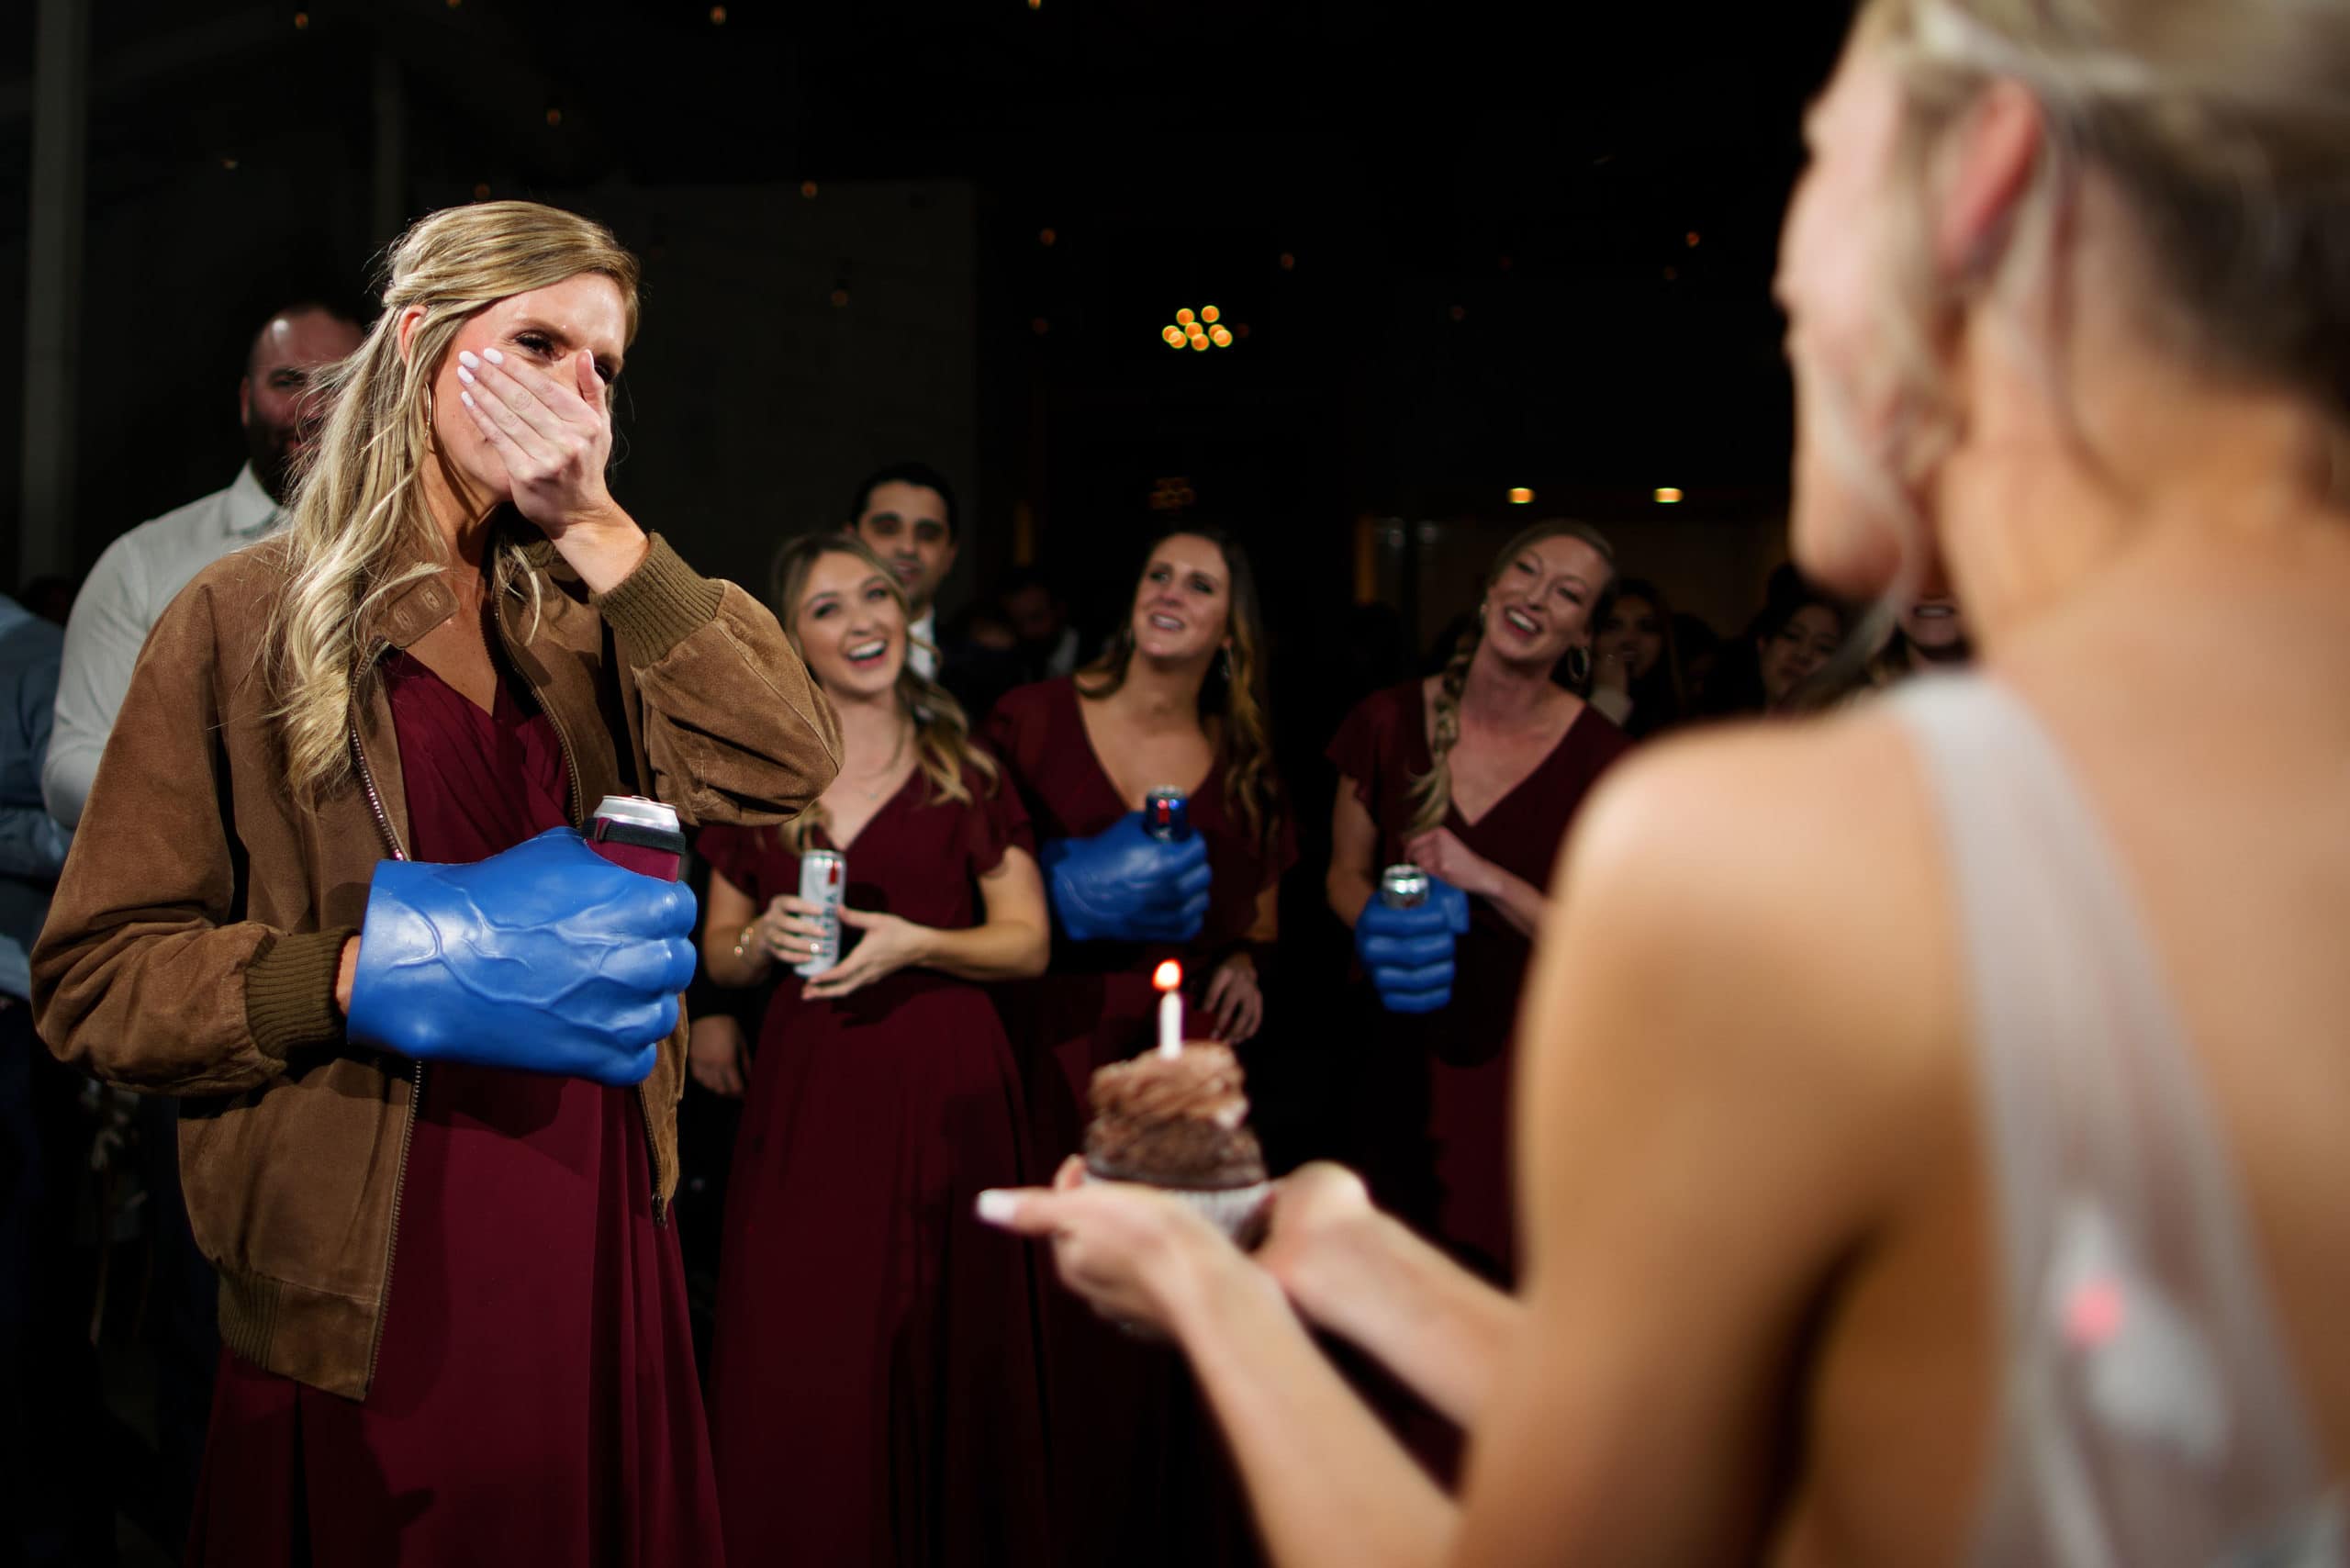 A bridesmaid reacts as the bride presents her with a candle-topped cupcake for her birthday